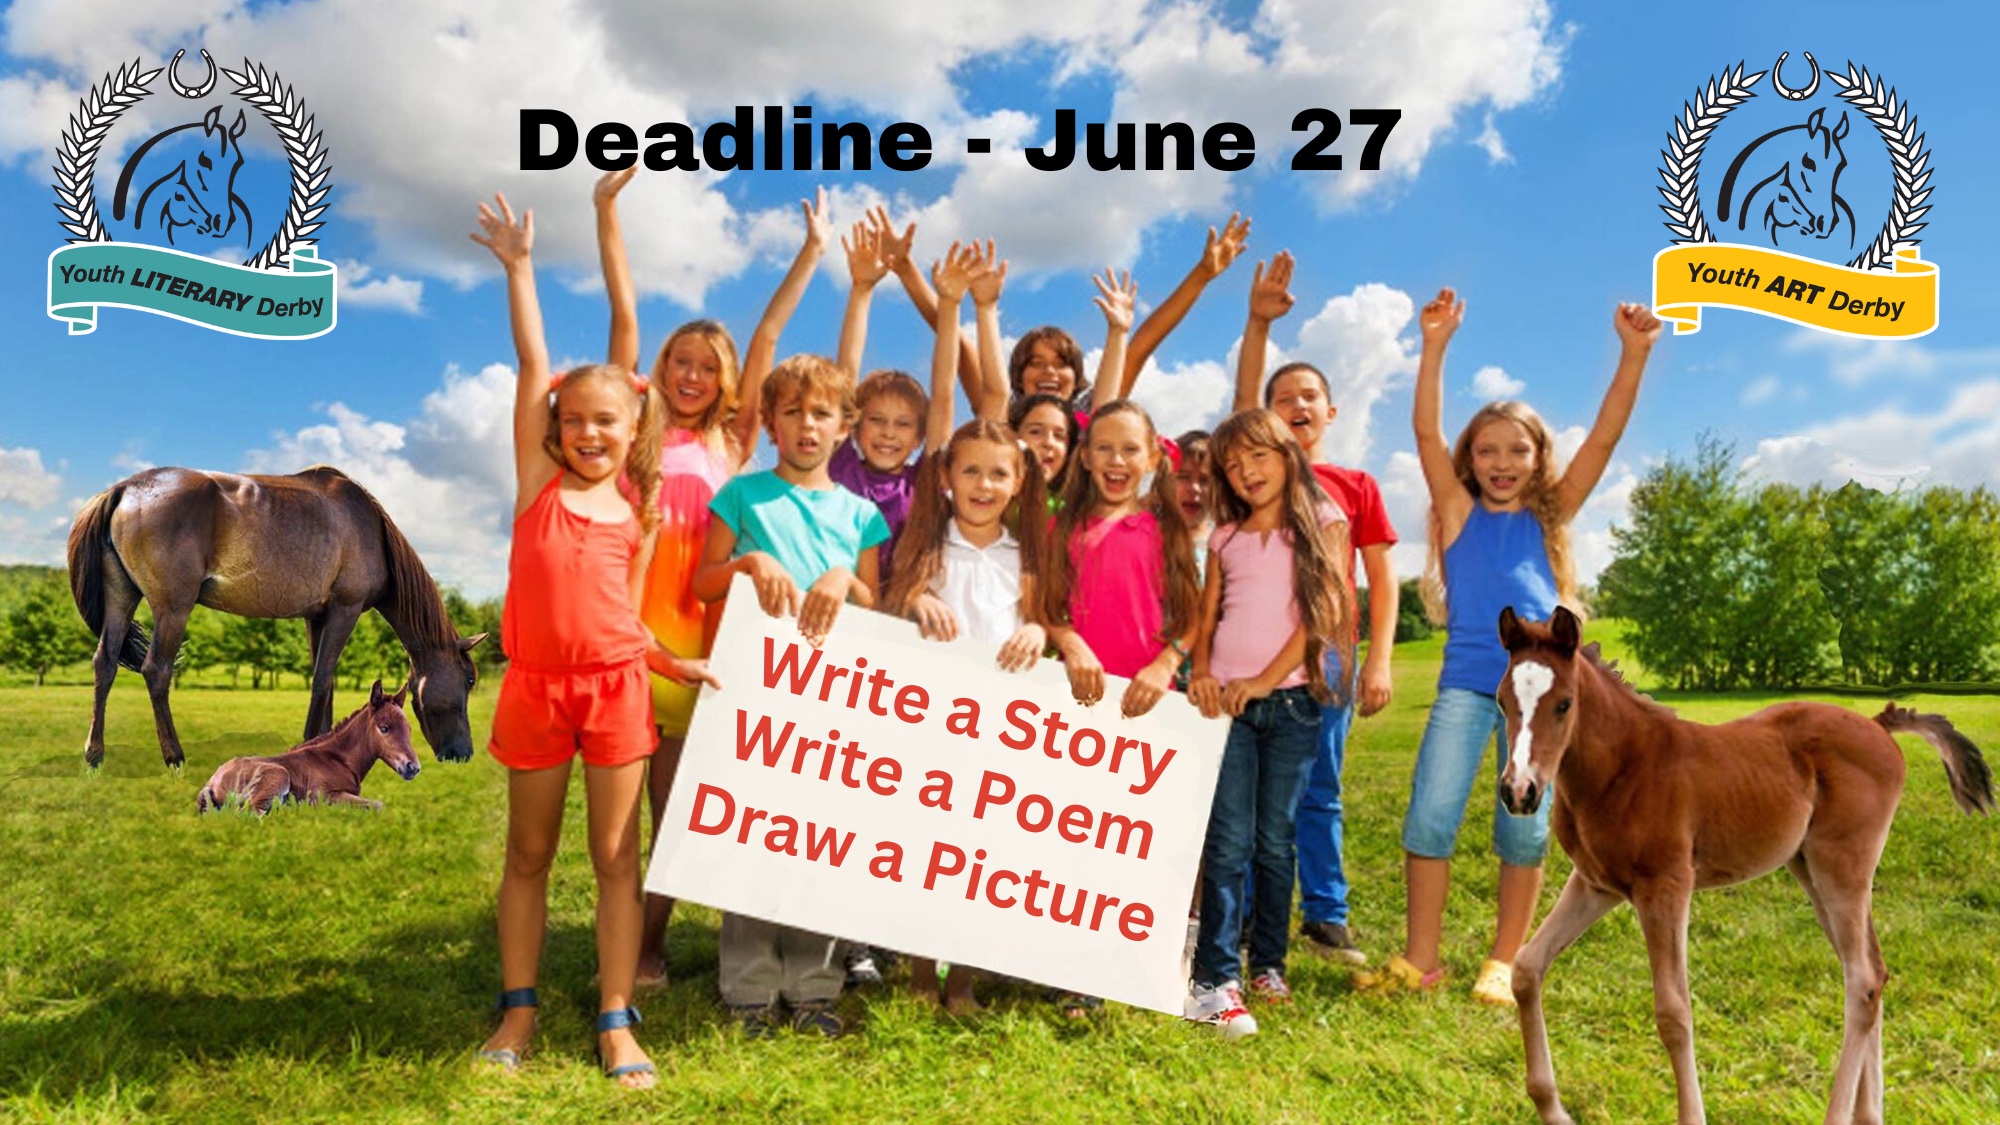 Deadline For Youth Literary Derby and Art Derby is Fast Approaching